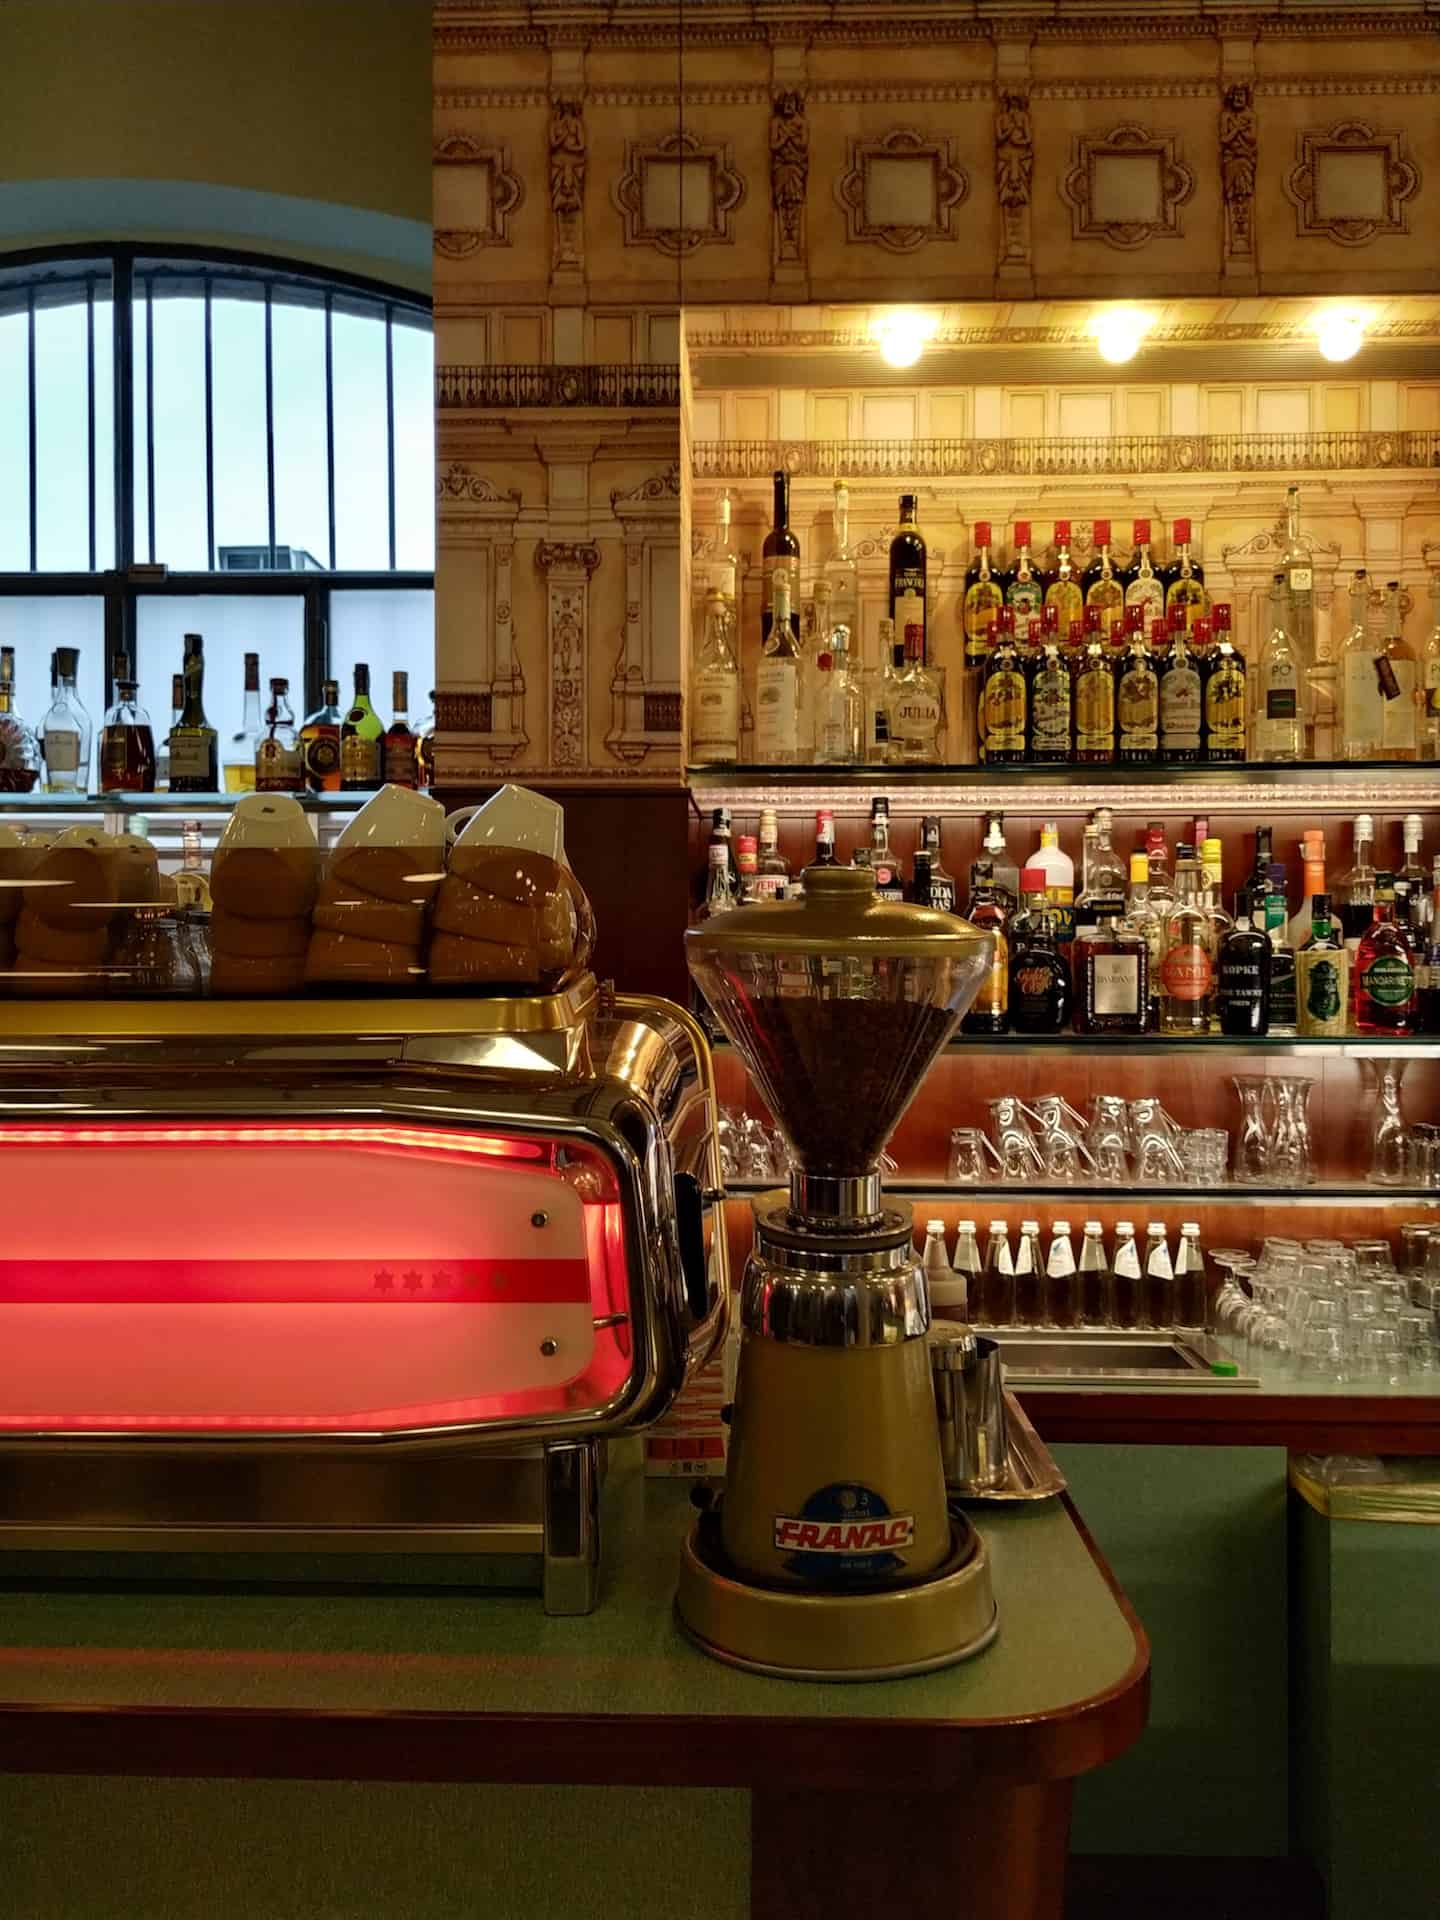 Bar Luce in the Prada Foundation designed by Wes Anderson